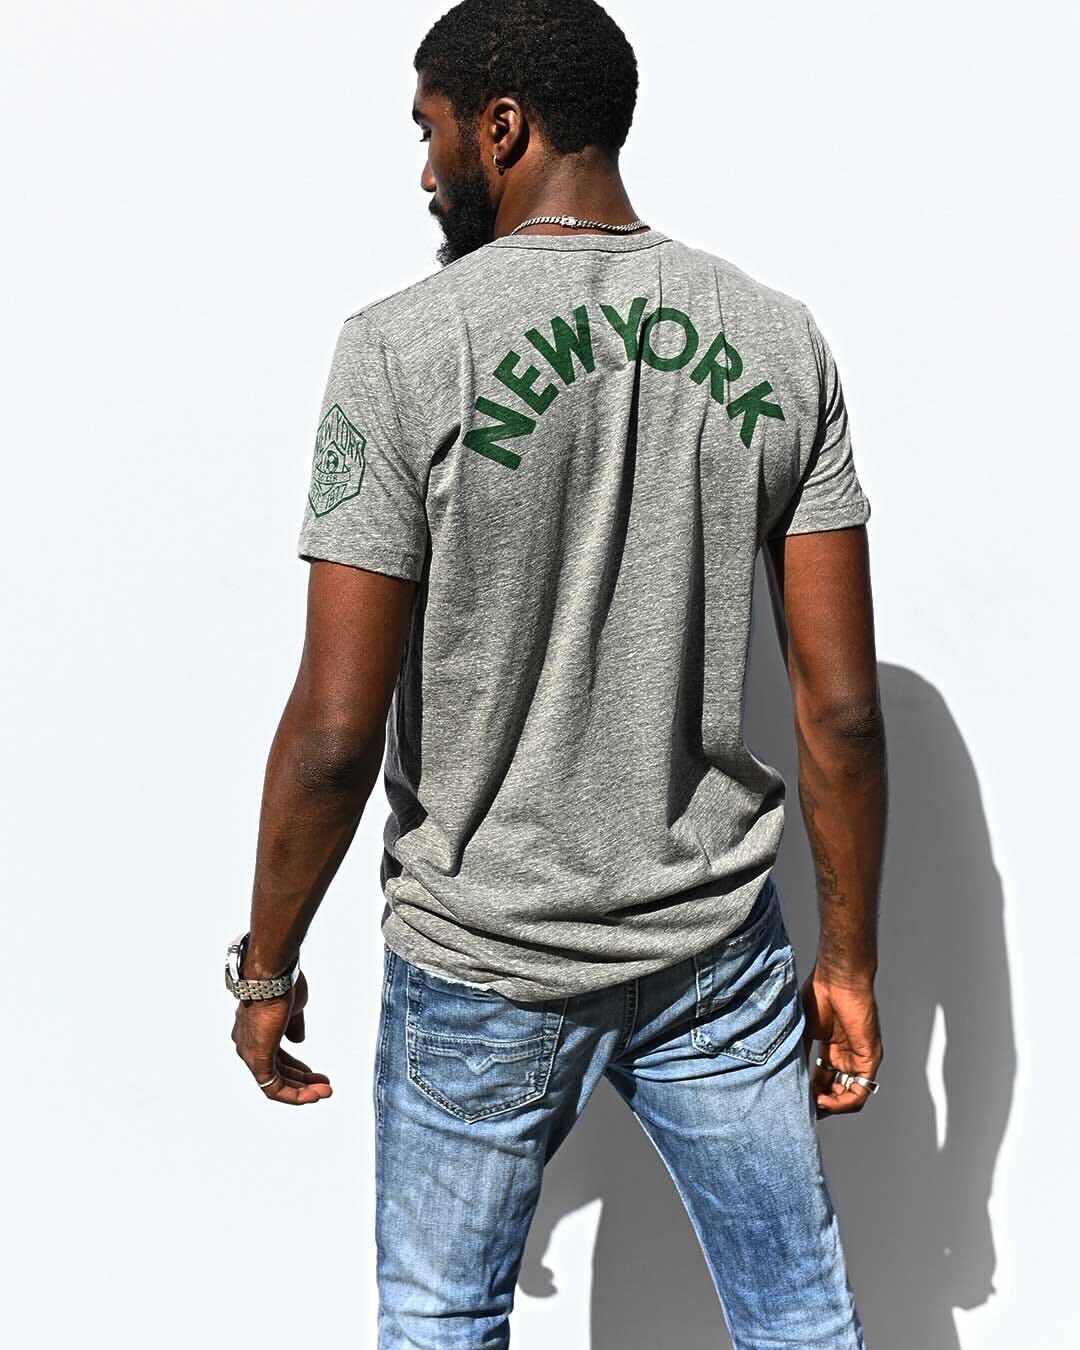 Pelé NYC Champ 1977 Grey Tee - Roots of Fight Canada